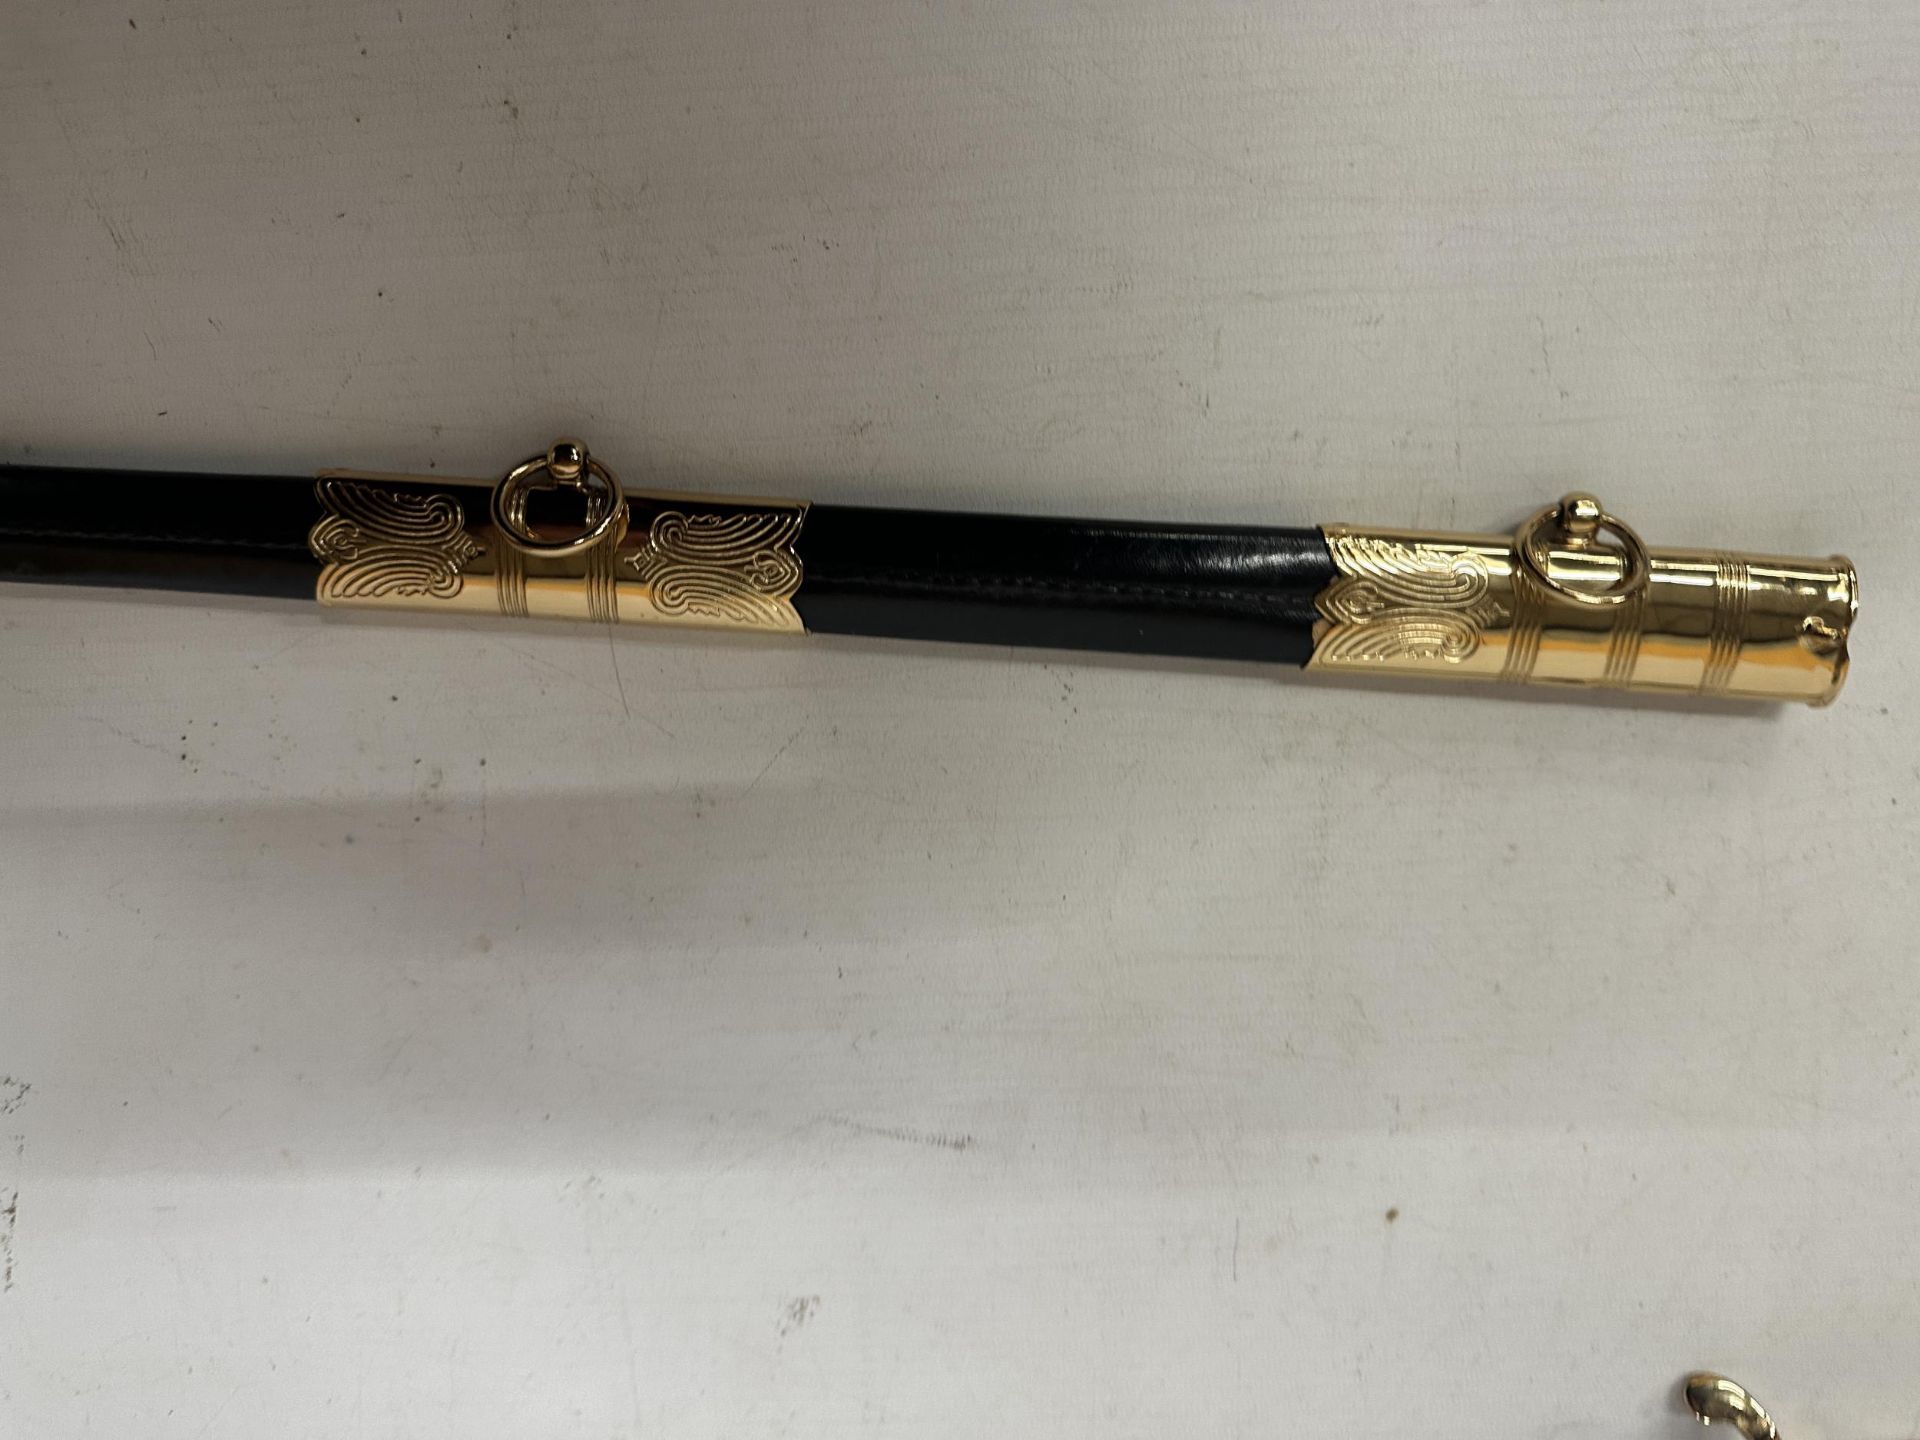 A MINT CONDITION GOOD QUALITY QUEEN ELIZABETH II NAVAL OFFICERS SWORD AND SCABBARD - 78CM BLADE WITH - Image 11 of 15